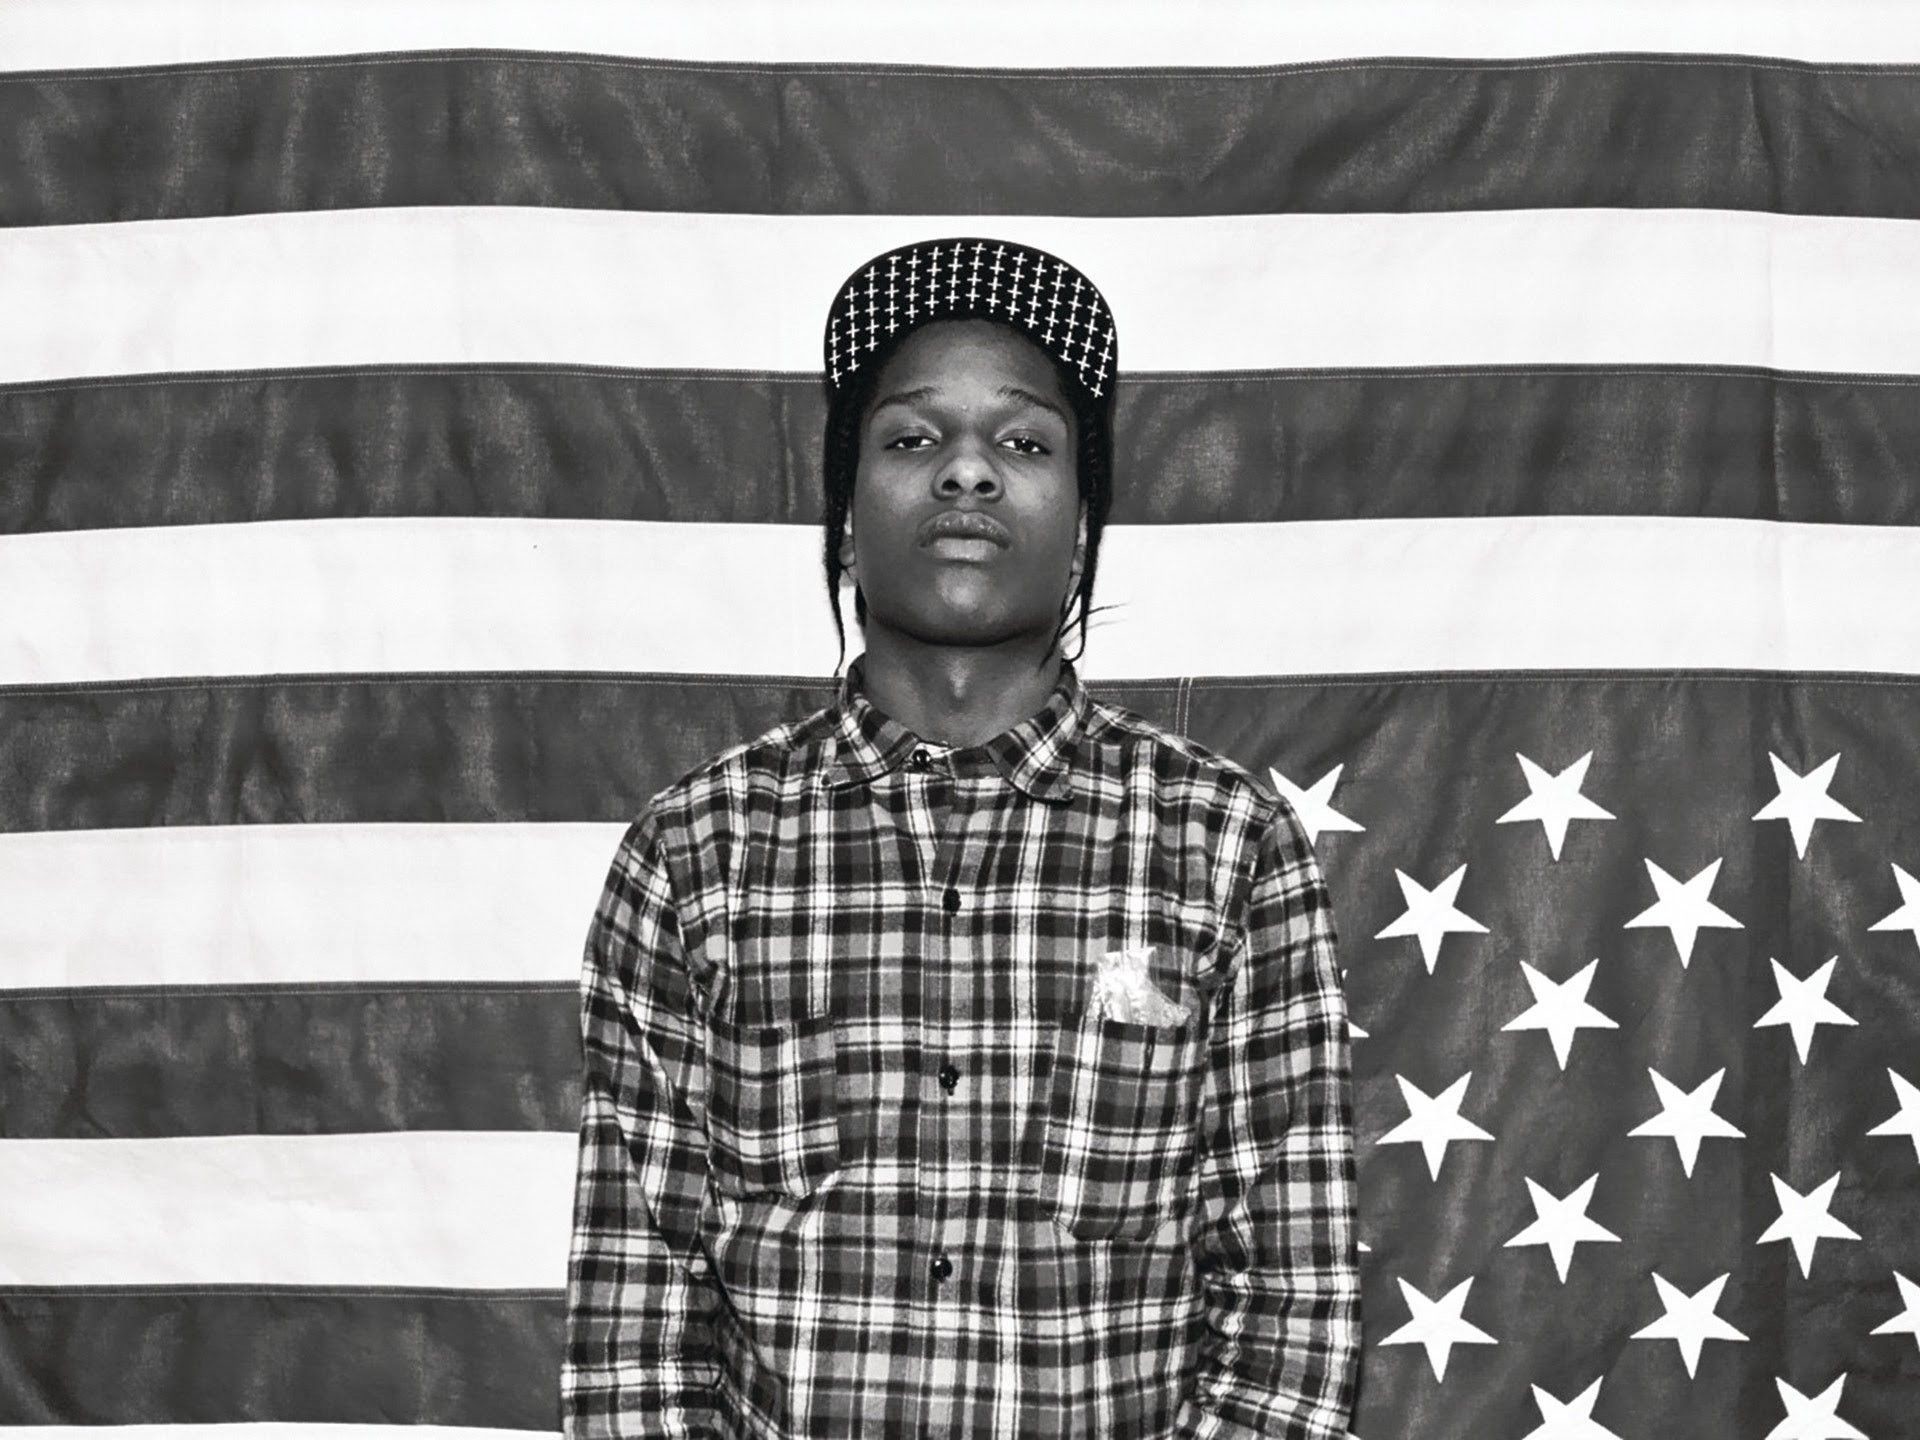 1920x1440 1327x1990 Asap Rocky iPhone 5 Wallpaper 65+ - Page 3 of 3 - xshyfc.com">